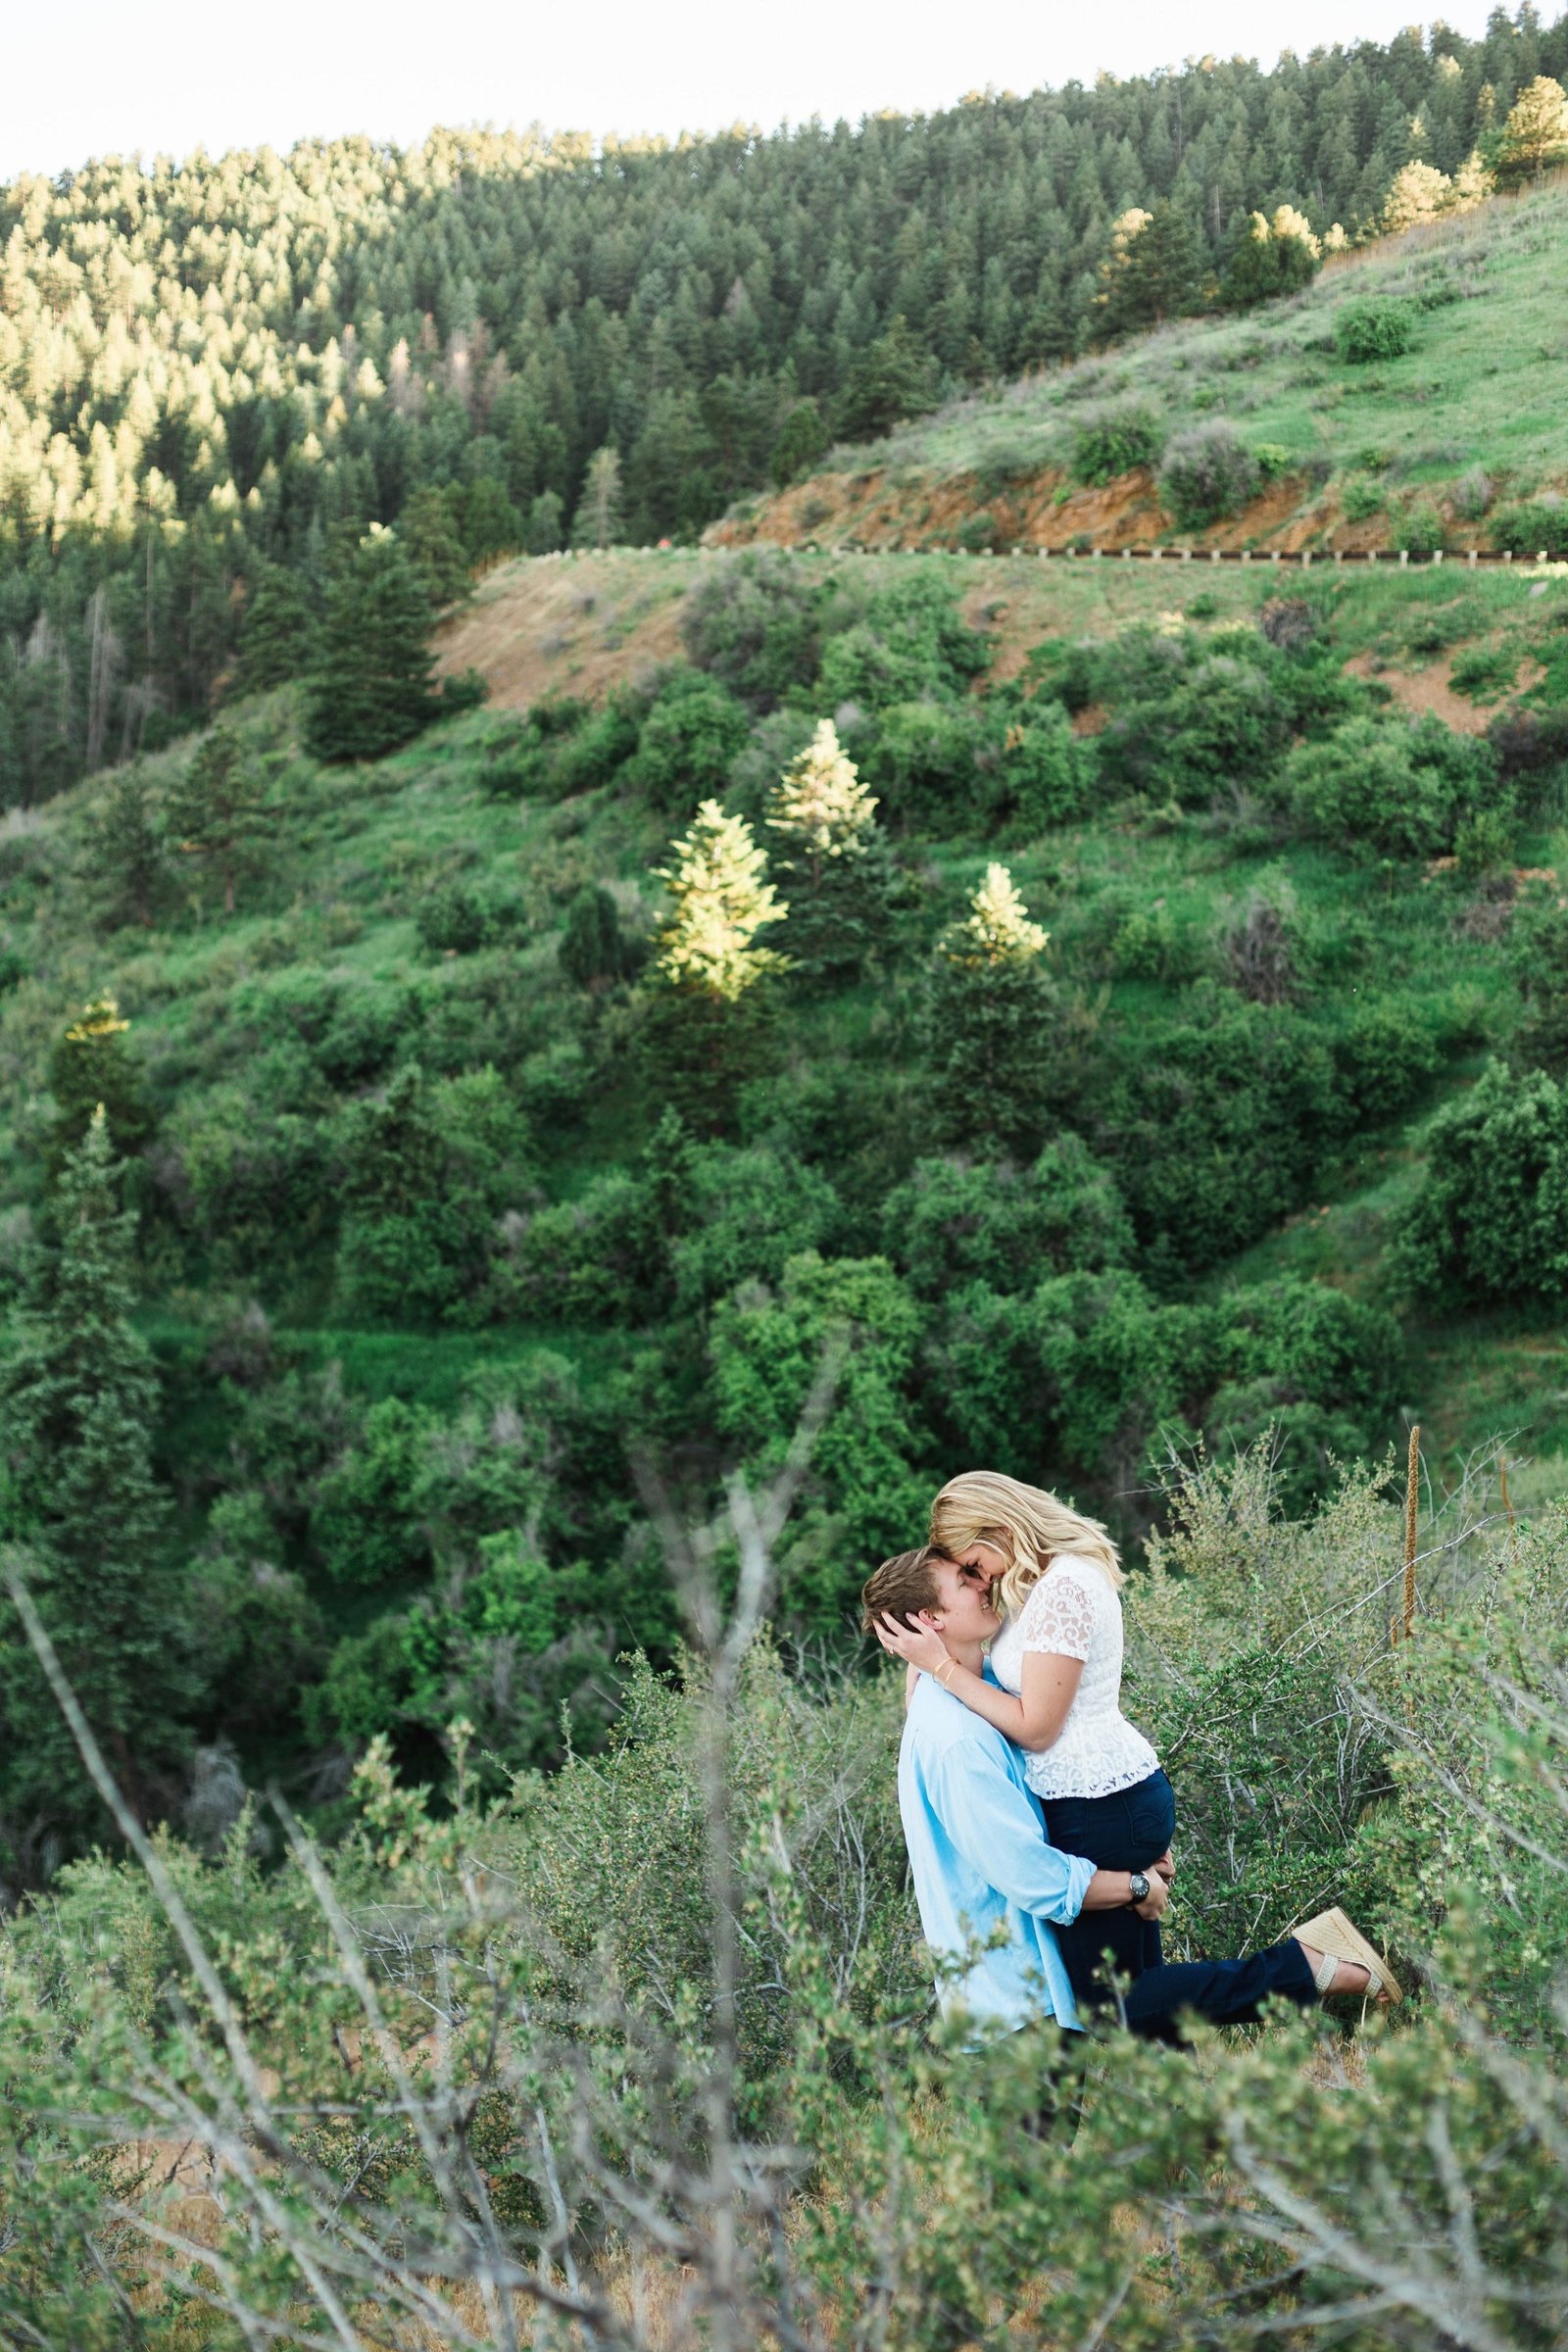 Engagements -Denver Lookout Mountain Engagement Session Golden Colorado Wedding Photographer Overlook City Lights Nature Outdoors Valley Light Couple (24)